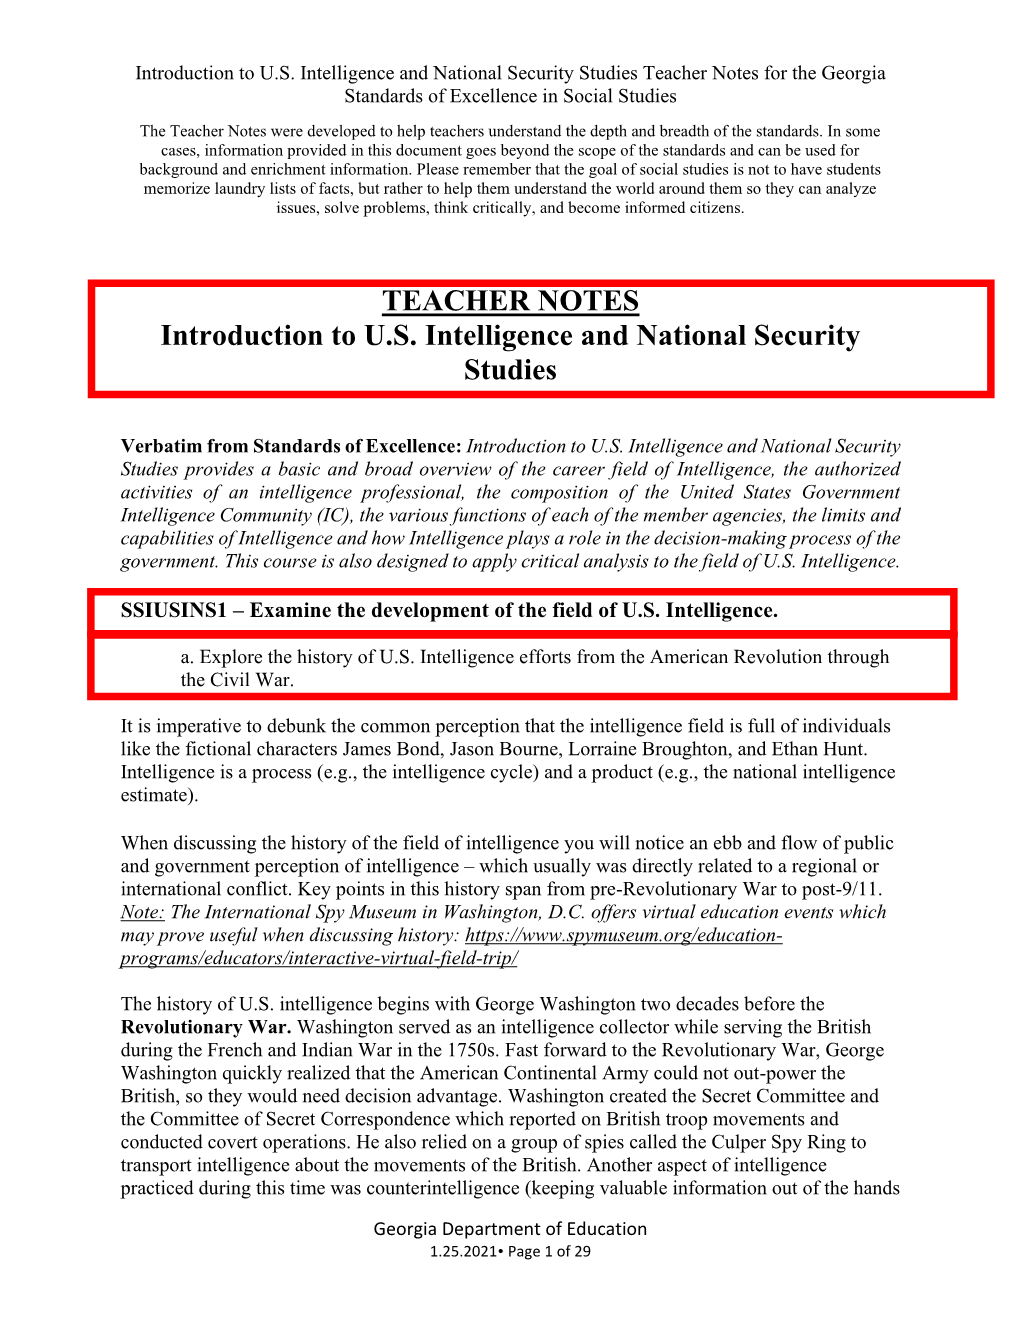 TEACHER NOTES Introduction to U.S. Intelligence and National Security Studies